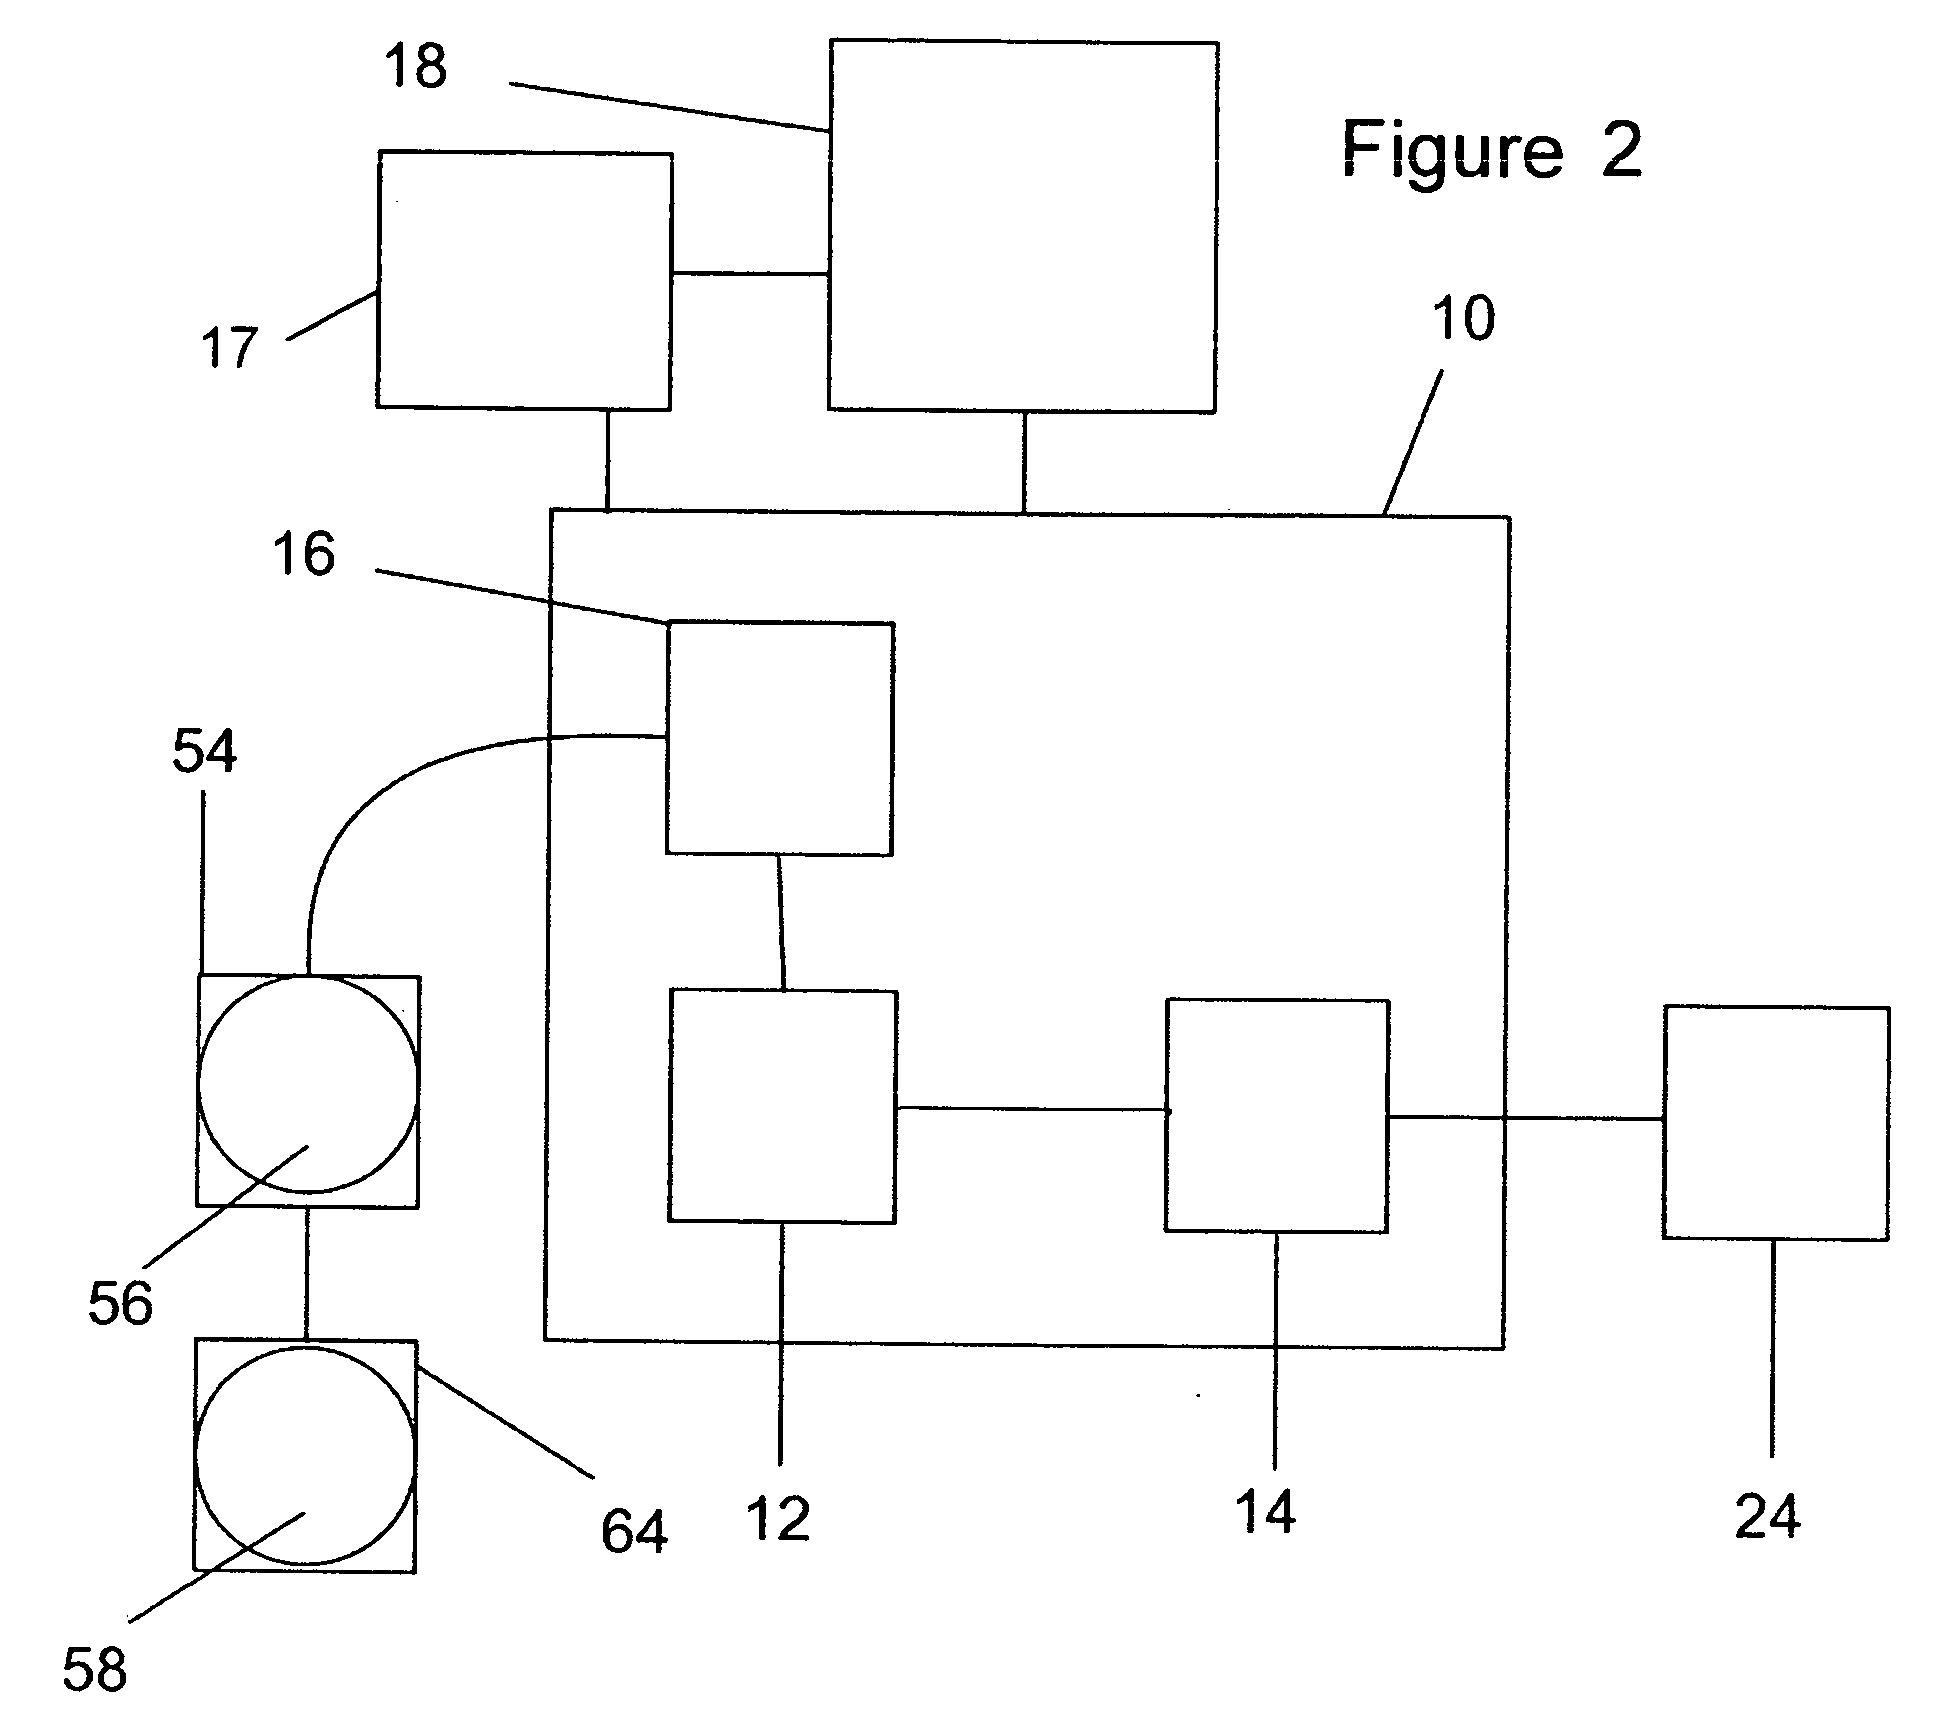 Automated method and system for creating an image storage device for playback on a playback mechanism